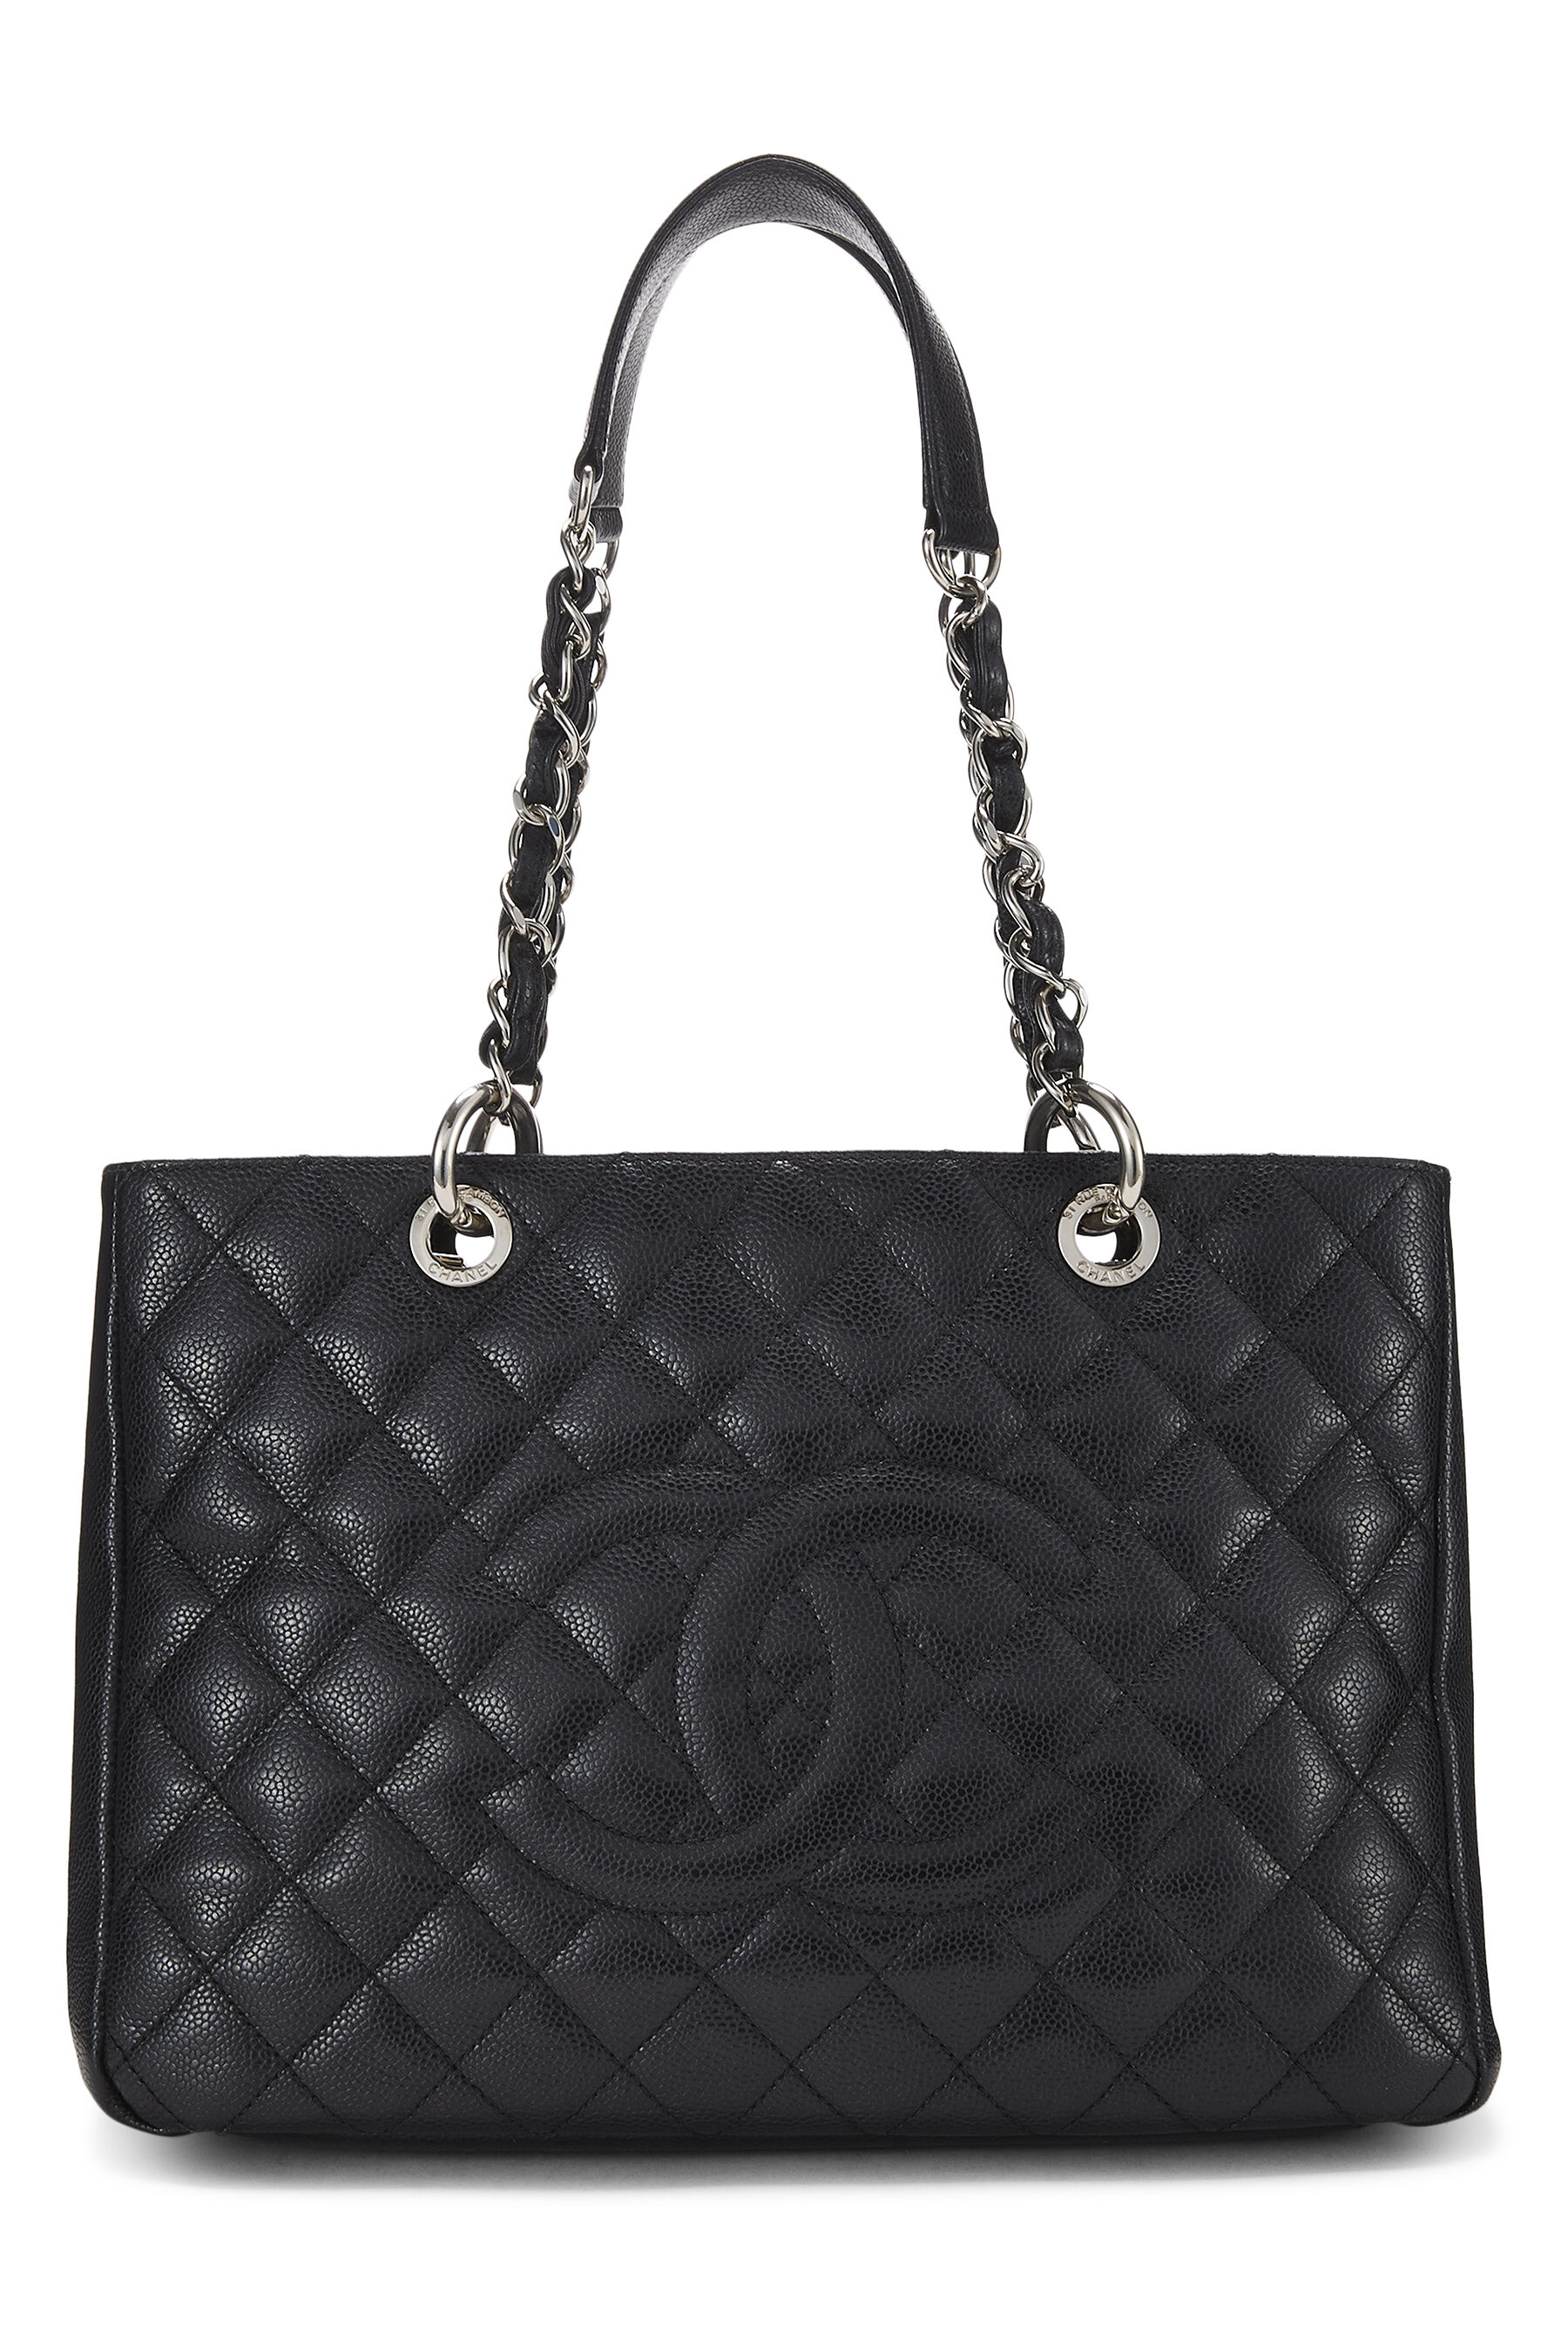 Chanel - Black Quilted Caviar Grand Shopping Tote (GST)